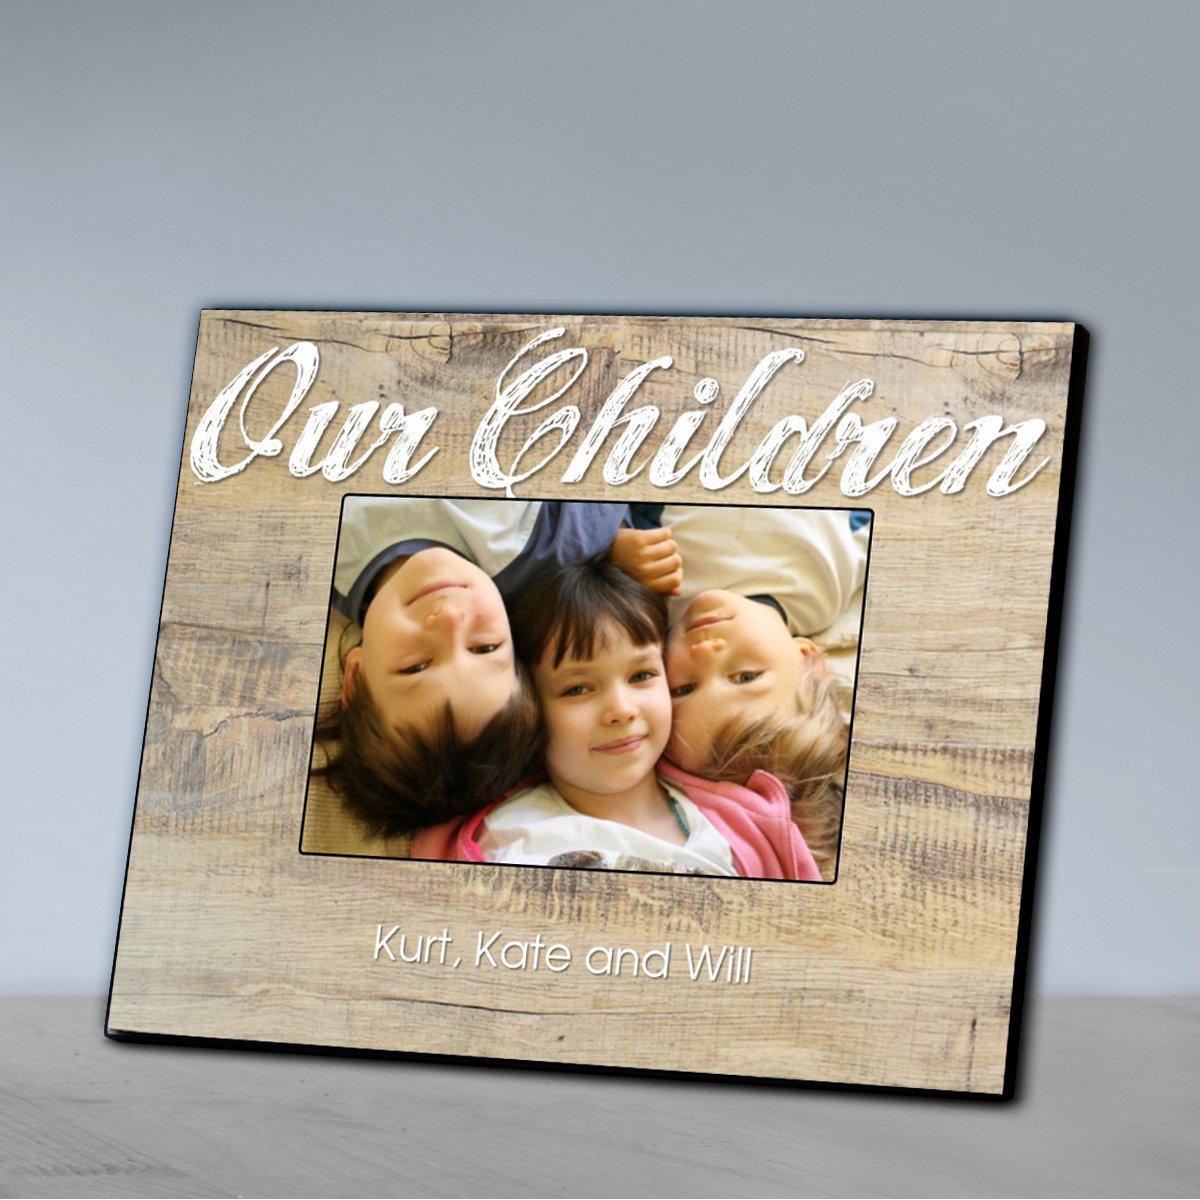 Personalized Family Picture Frame - All